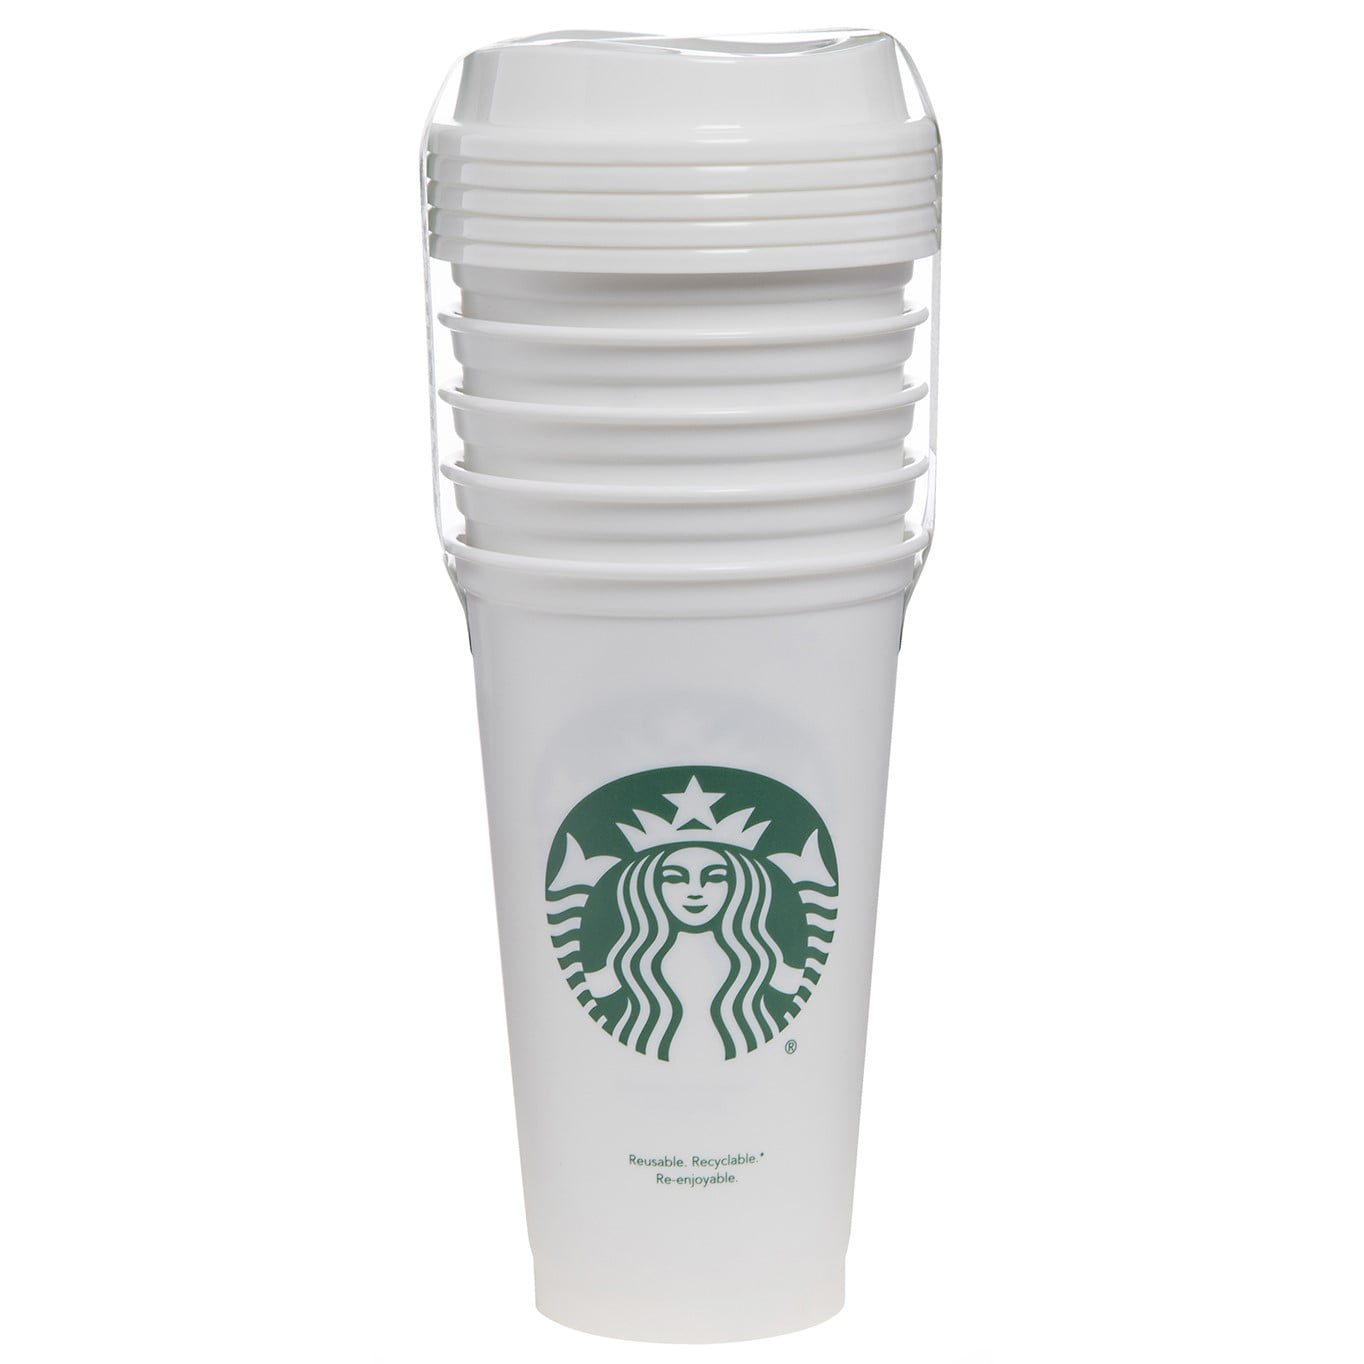 Starbucks LIVE IN THE WOW Reusable Plastic Coffee Cup  